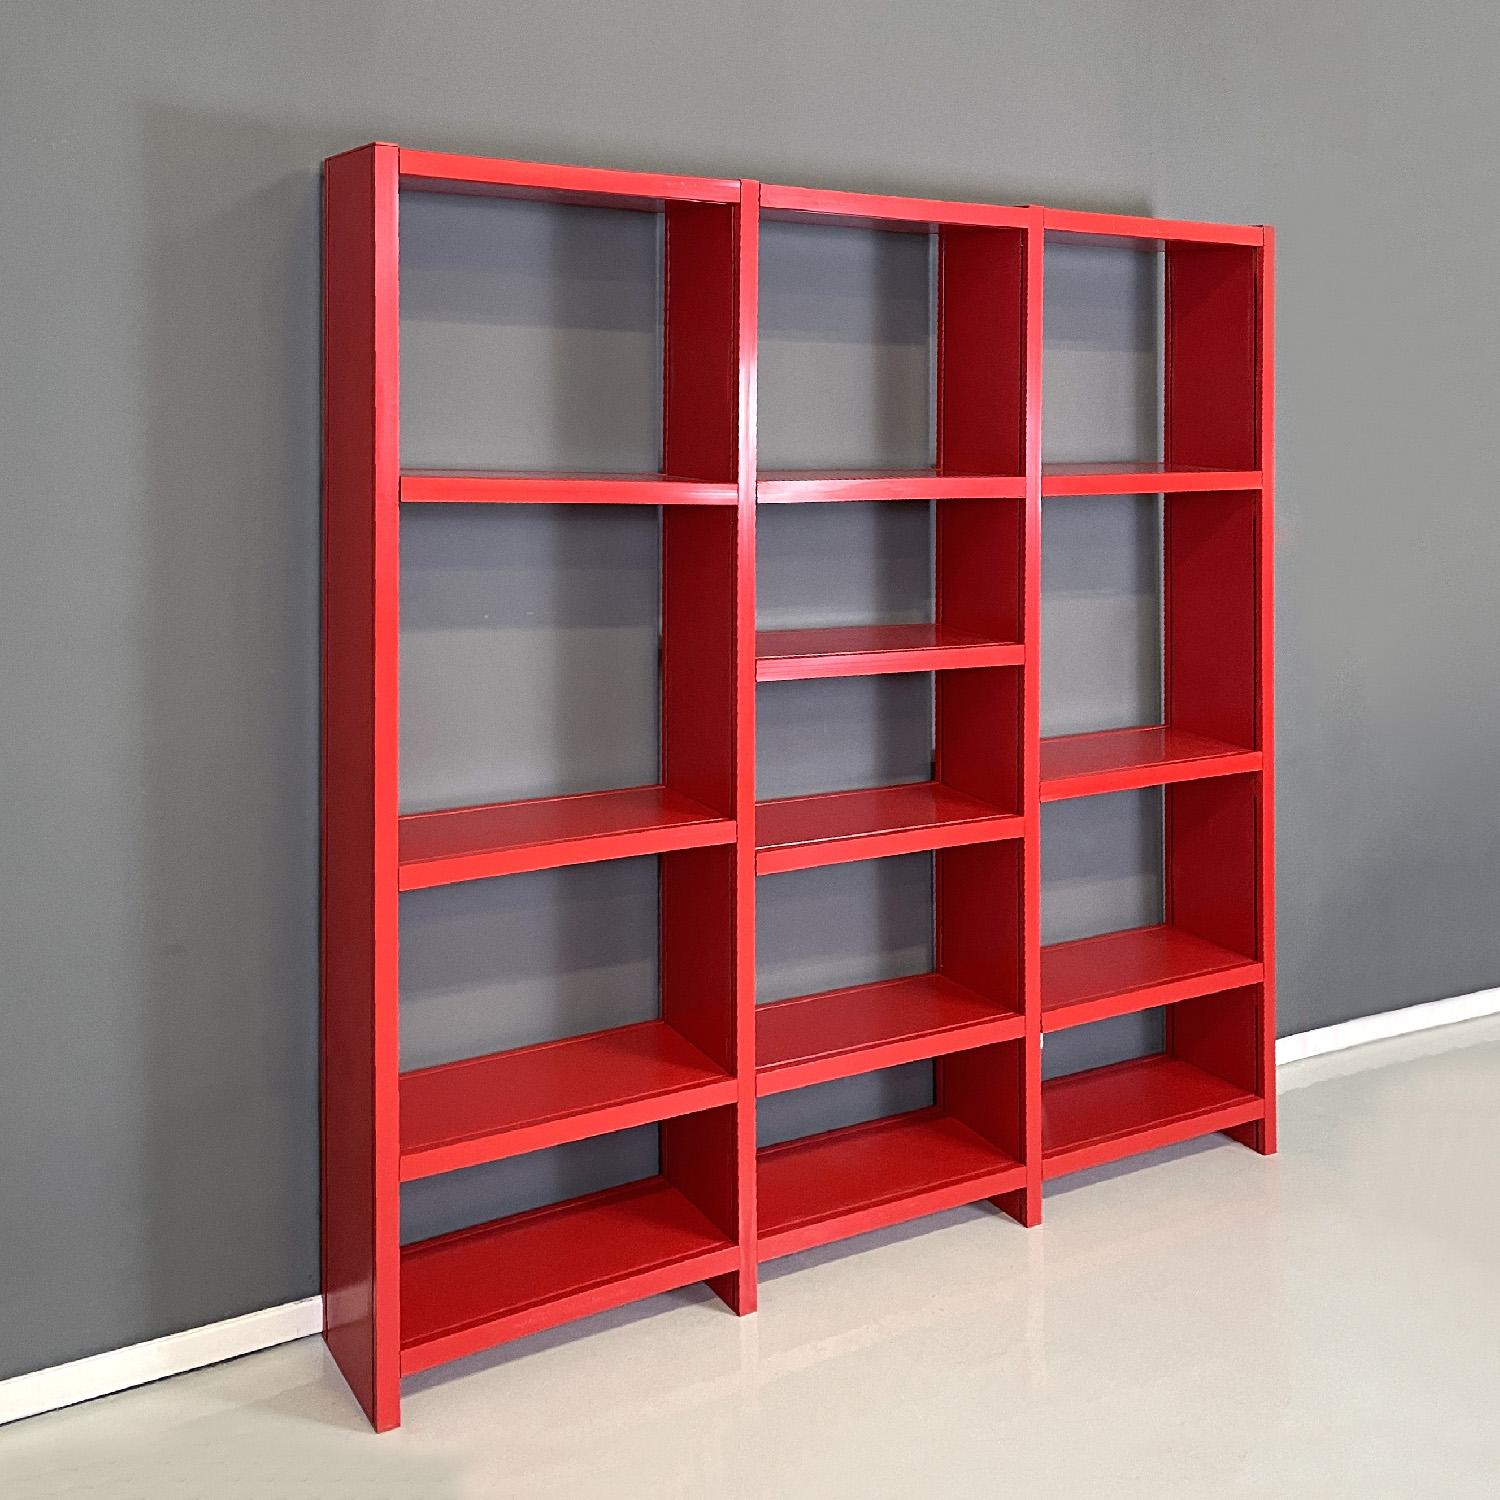 Italian modern red bookcase Dodona 300 by Ernesto Gismondi for Artemide, 1970s
Modular sky-earth bookcase mod. Dodona 300 in bright red plastic. The components are all rectangular in section, it is possible to change the arrangement of the shelves